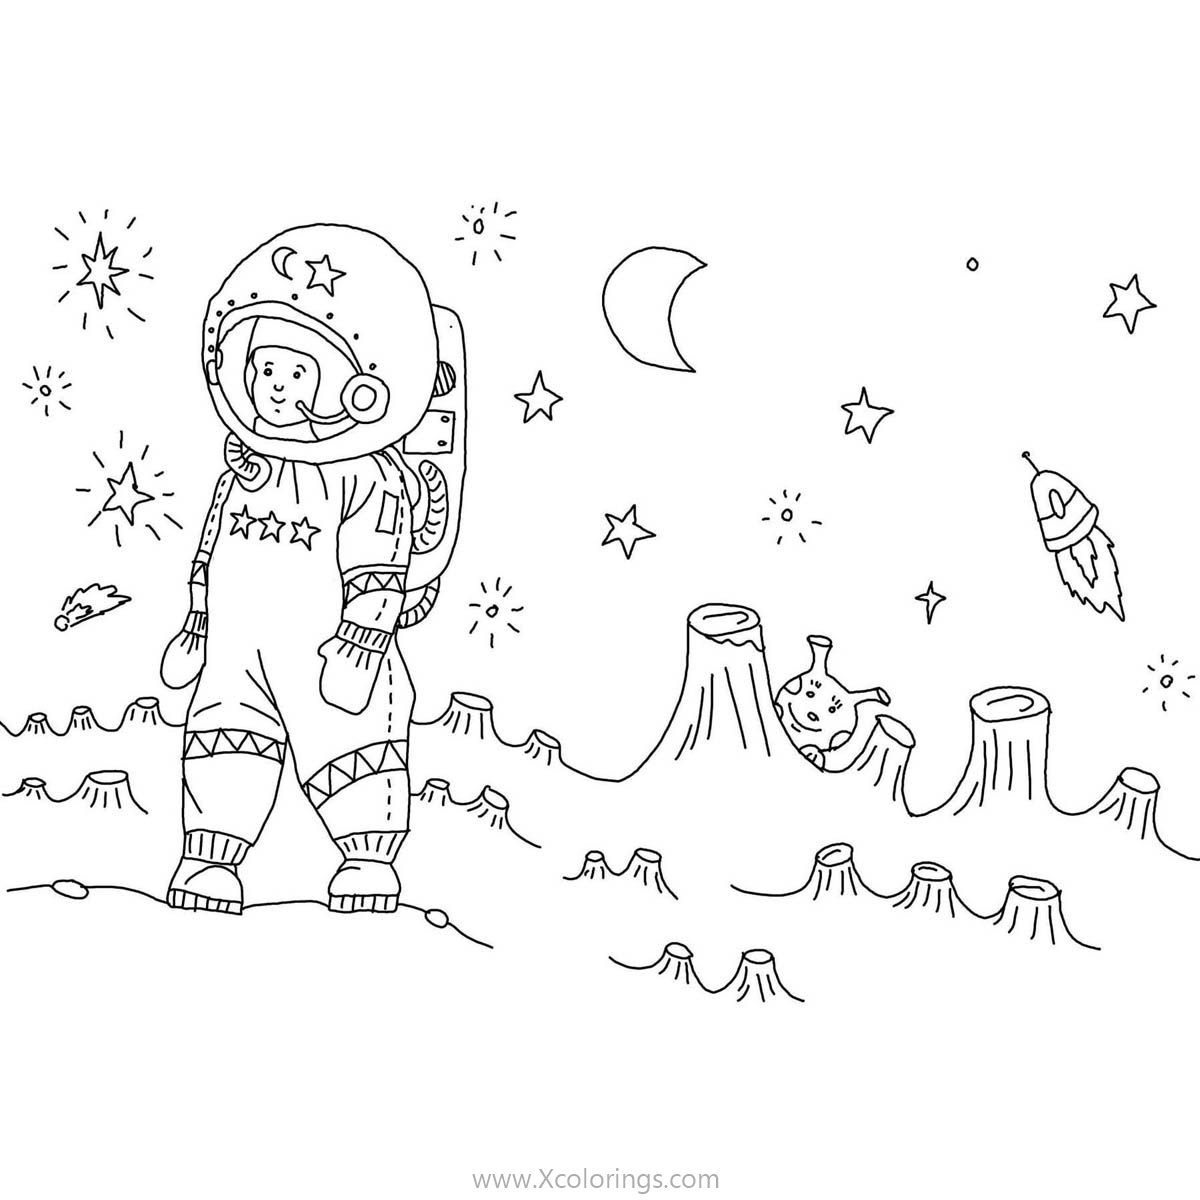 Free Astronaut Reached a Planet Coloring Pages printable